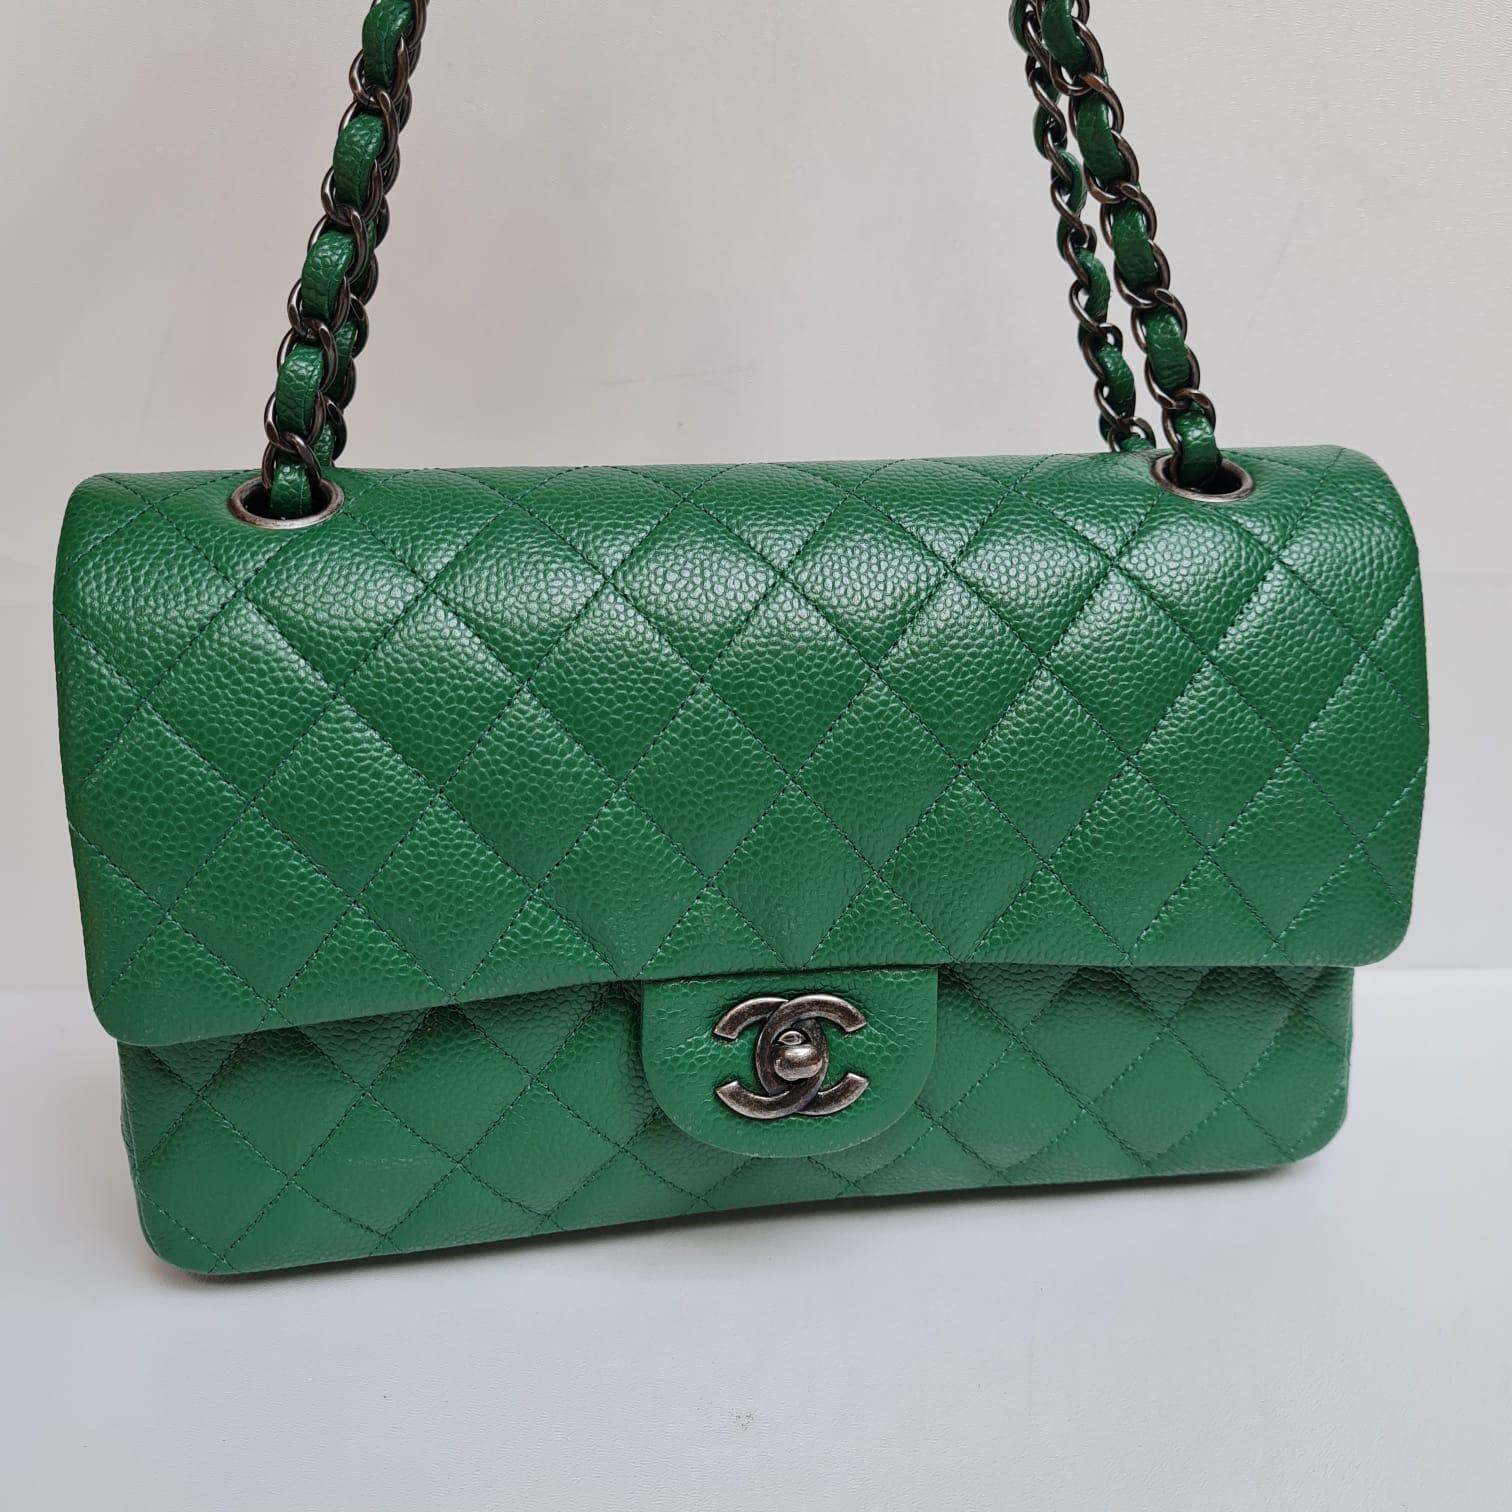 Rare Chanel Emerald Green Caviar Quilted Classic Medium Double Flap Bag RHW 11